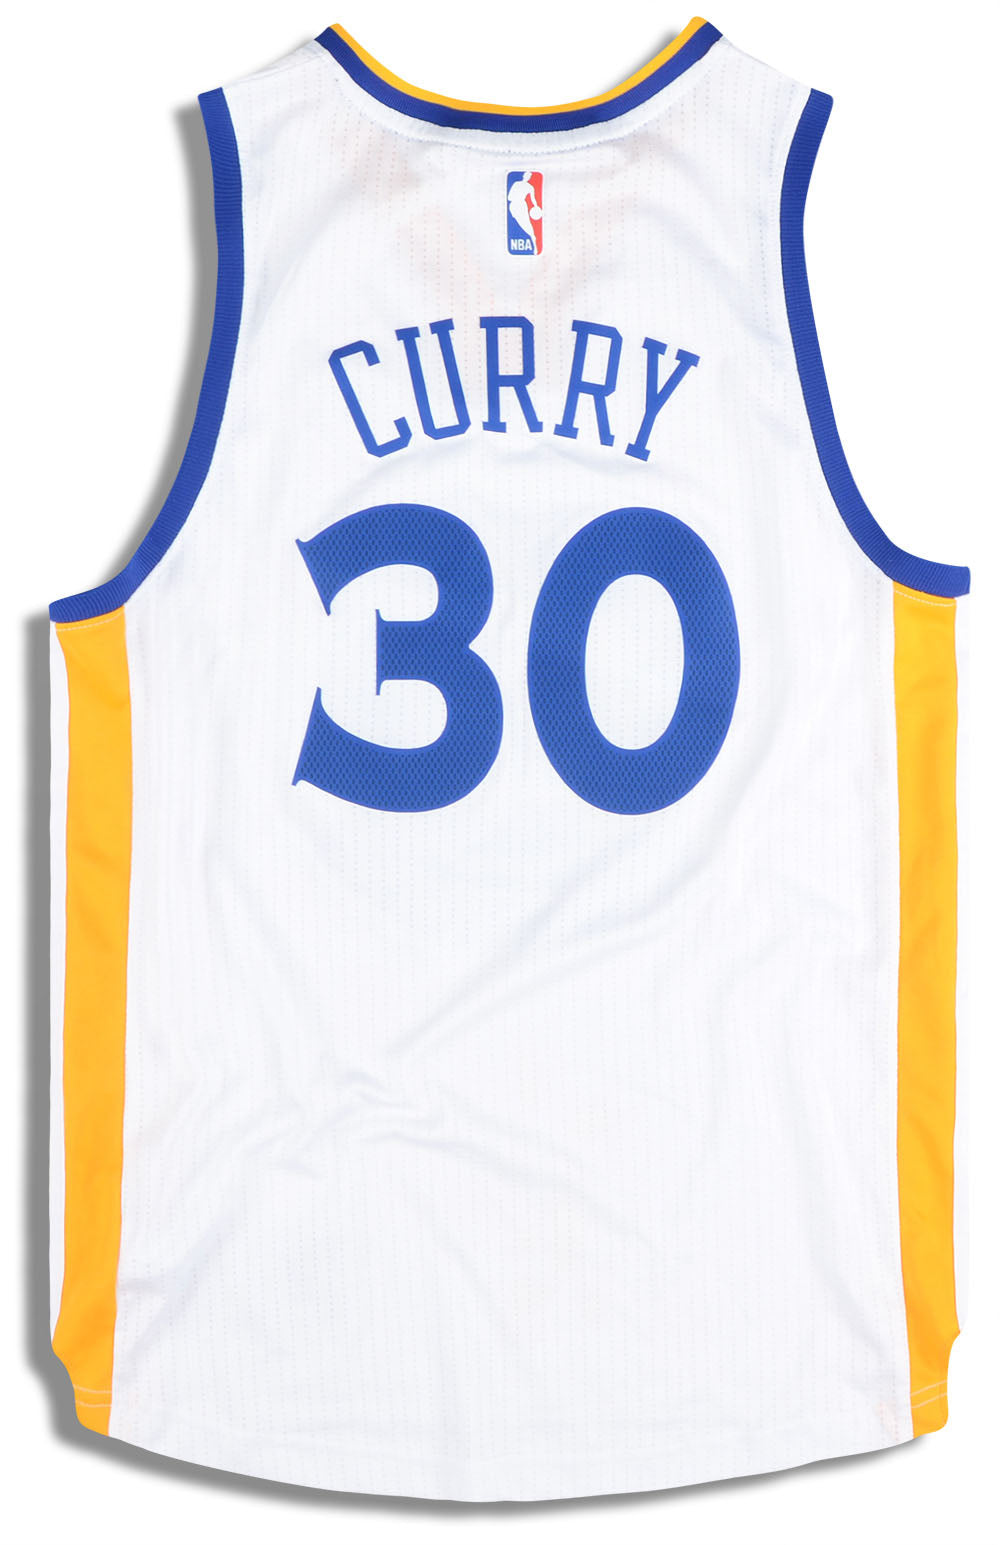 2014-17 GOLDEN STATE WARRIORS CURRY #30 ADIDAS SWINGMAN JERSEY (AWAY) L -  W/TAGS